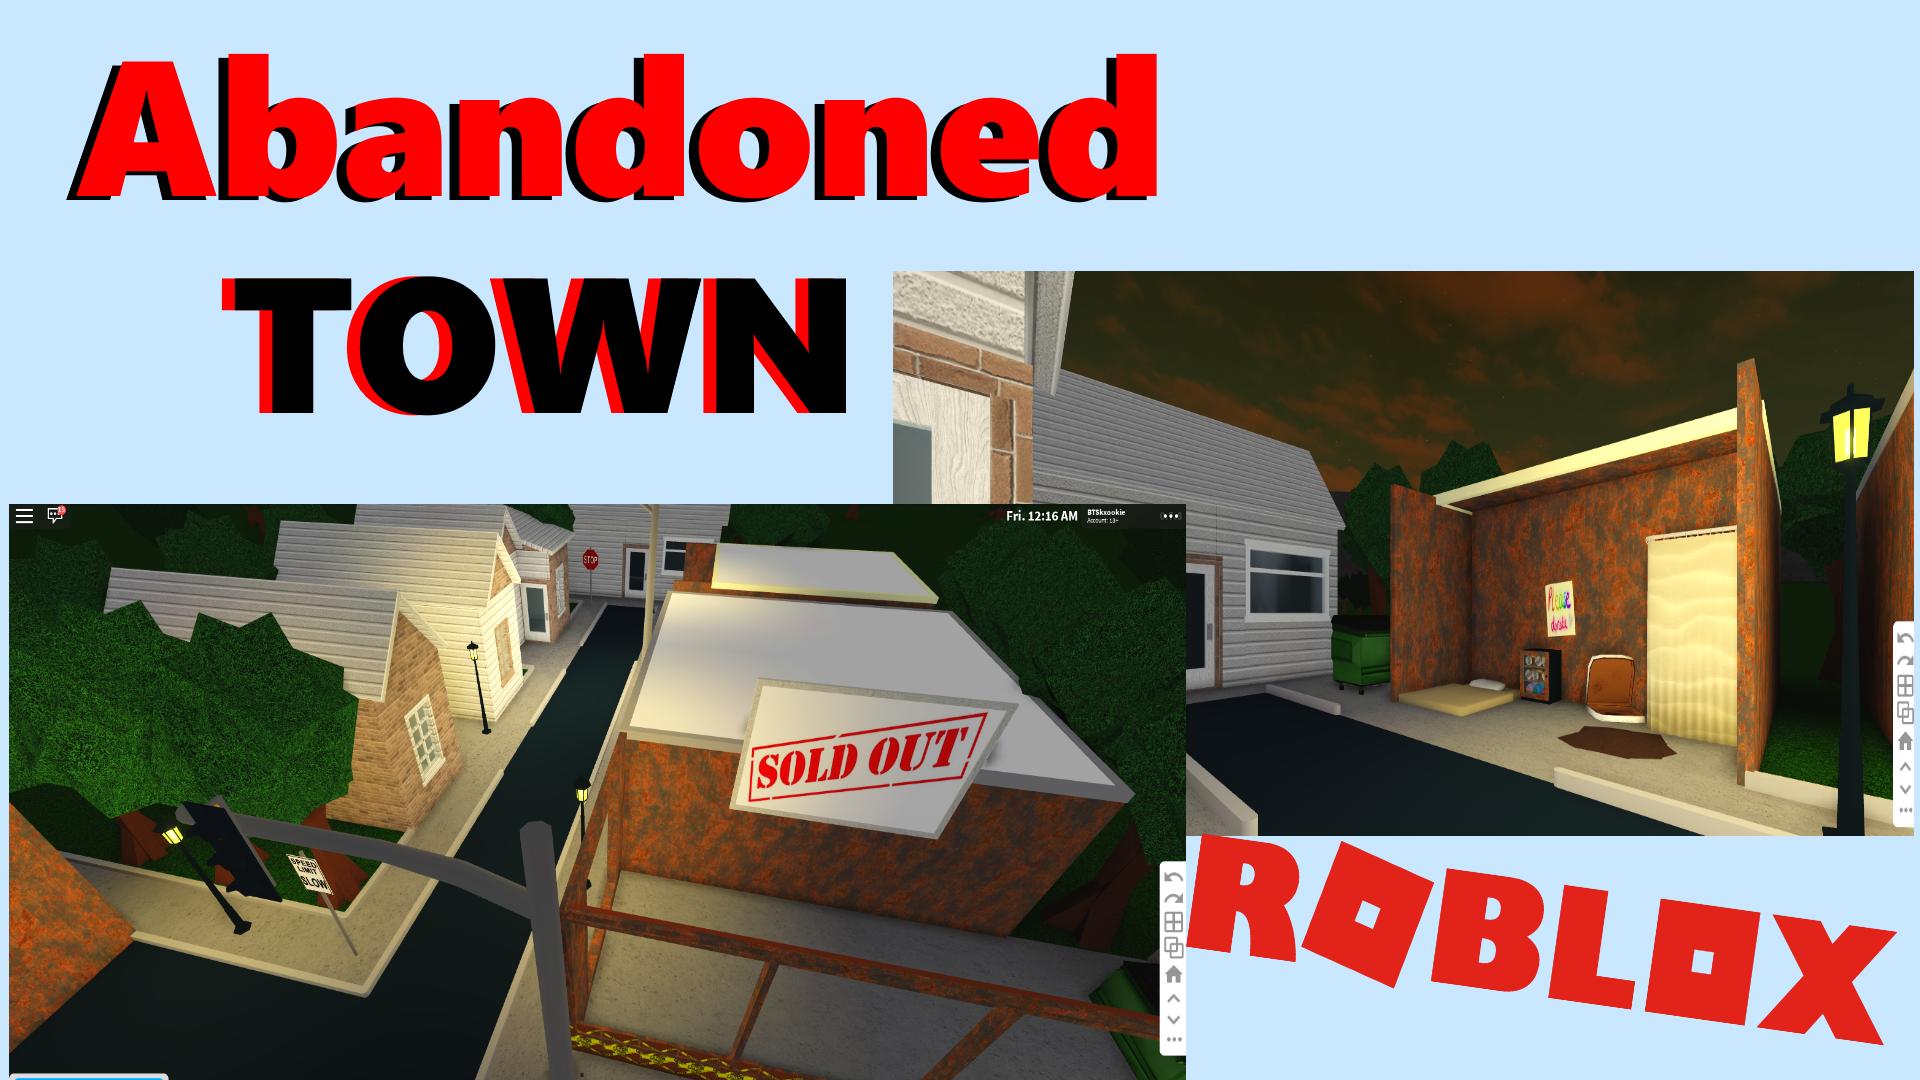 Bloominghoul Twitterissa I Just Finished Building This Realistic Abandoned Town On Bloxburg For My Poor To Rich Series On My Youtube Channel P Want To Tour It Comment Your Roblox Username Below - roblox town bloxburg